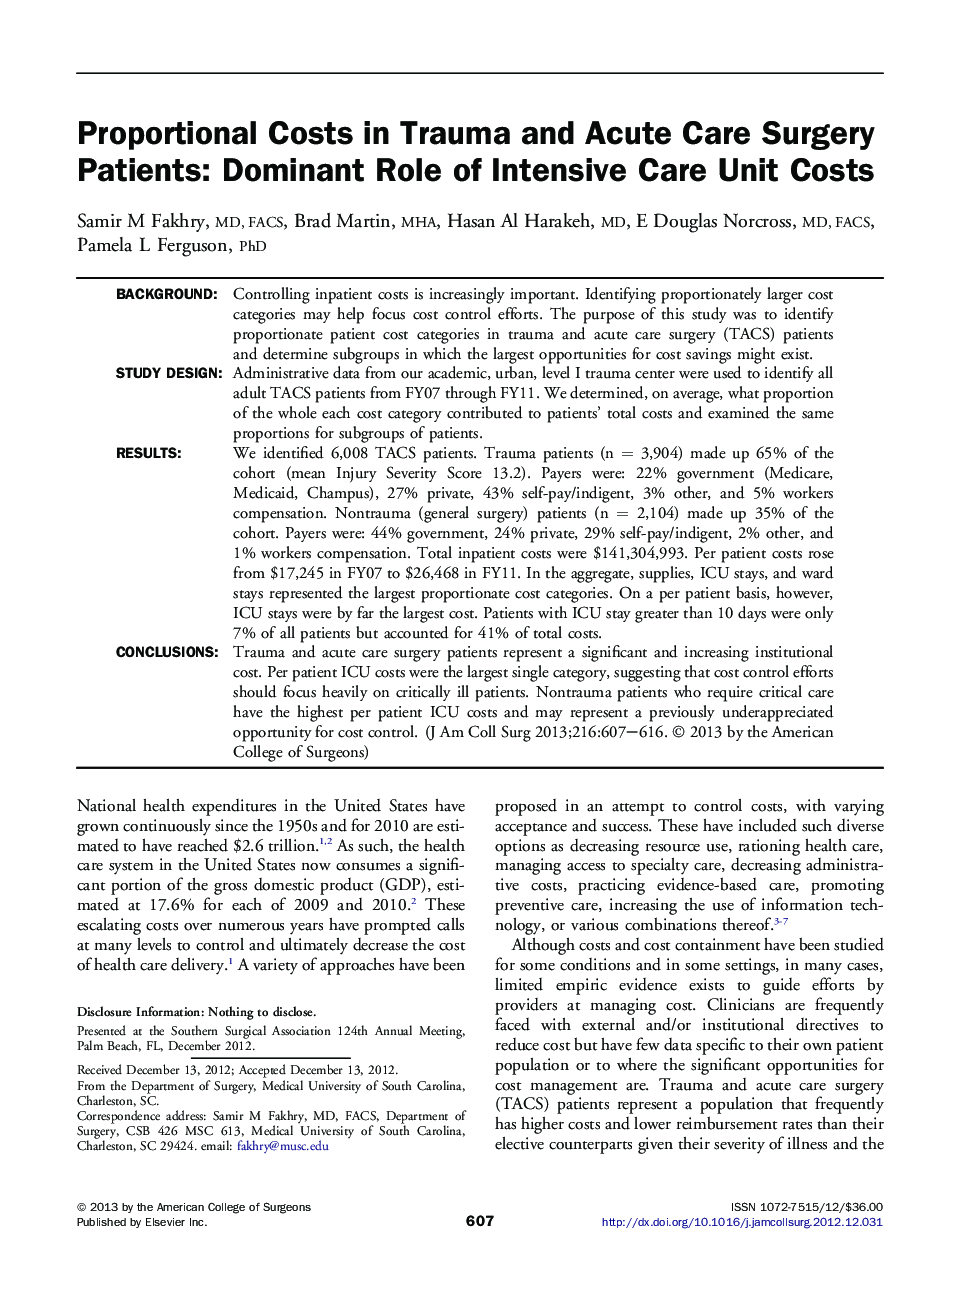 Proportional Costs in Trauma and Acute Care Surgery Patients: Dominant Role of Intensive Care Unit Costs 